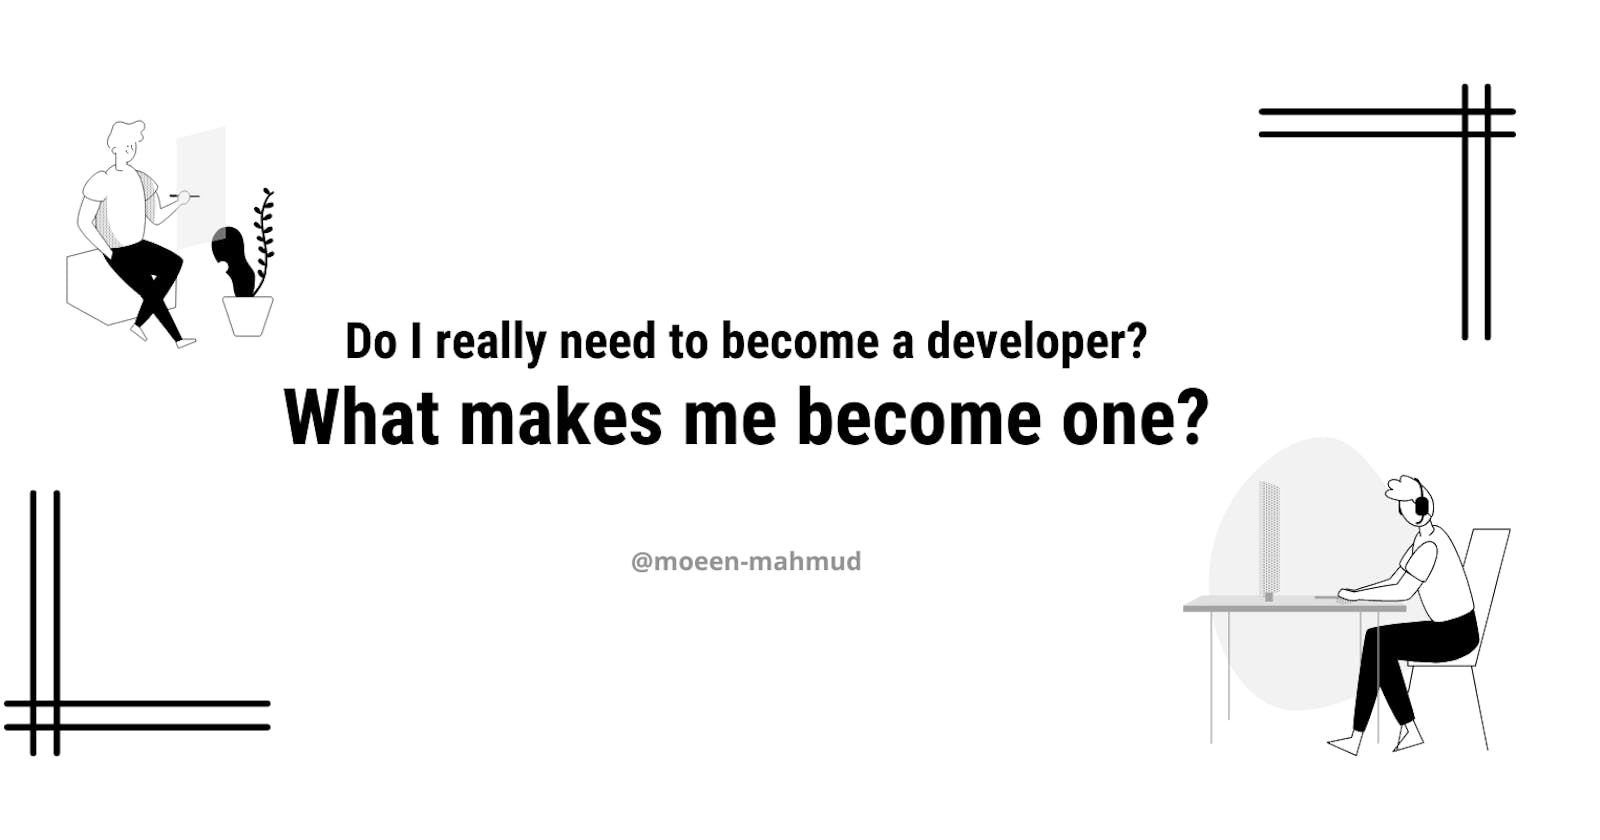 Do I really need to become a developer? 
What makes me become one?